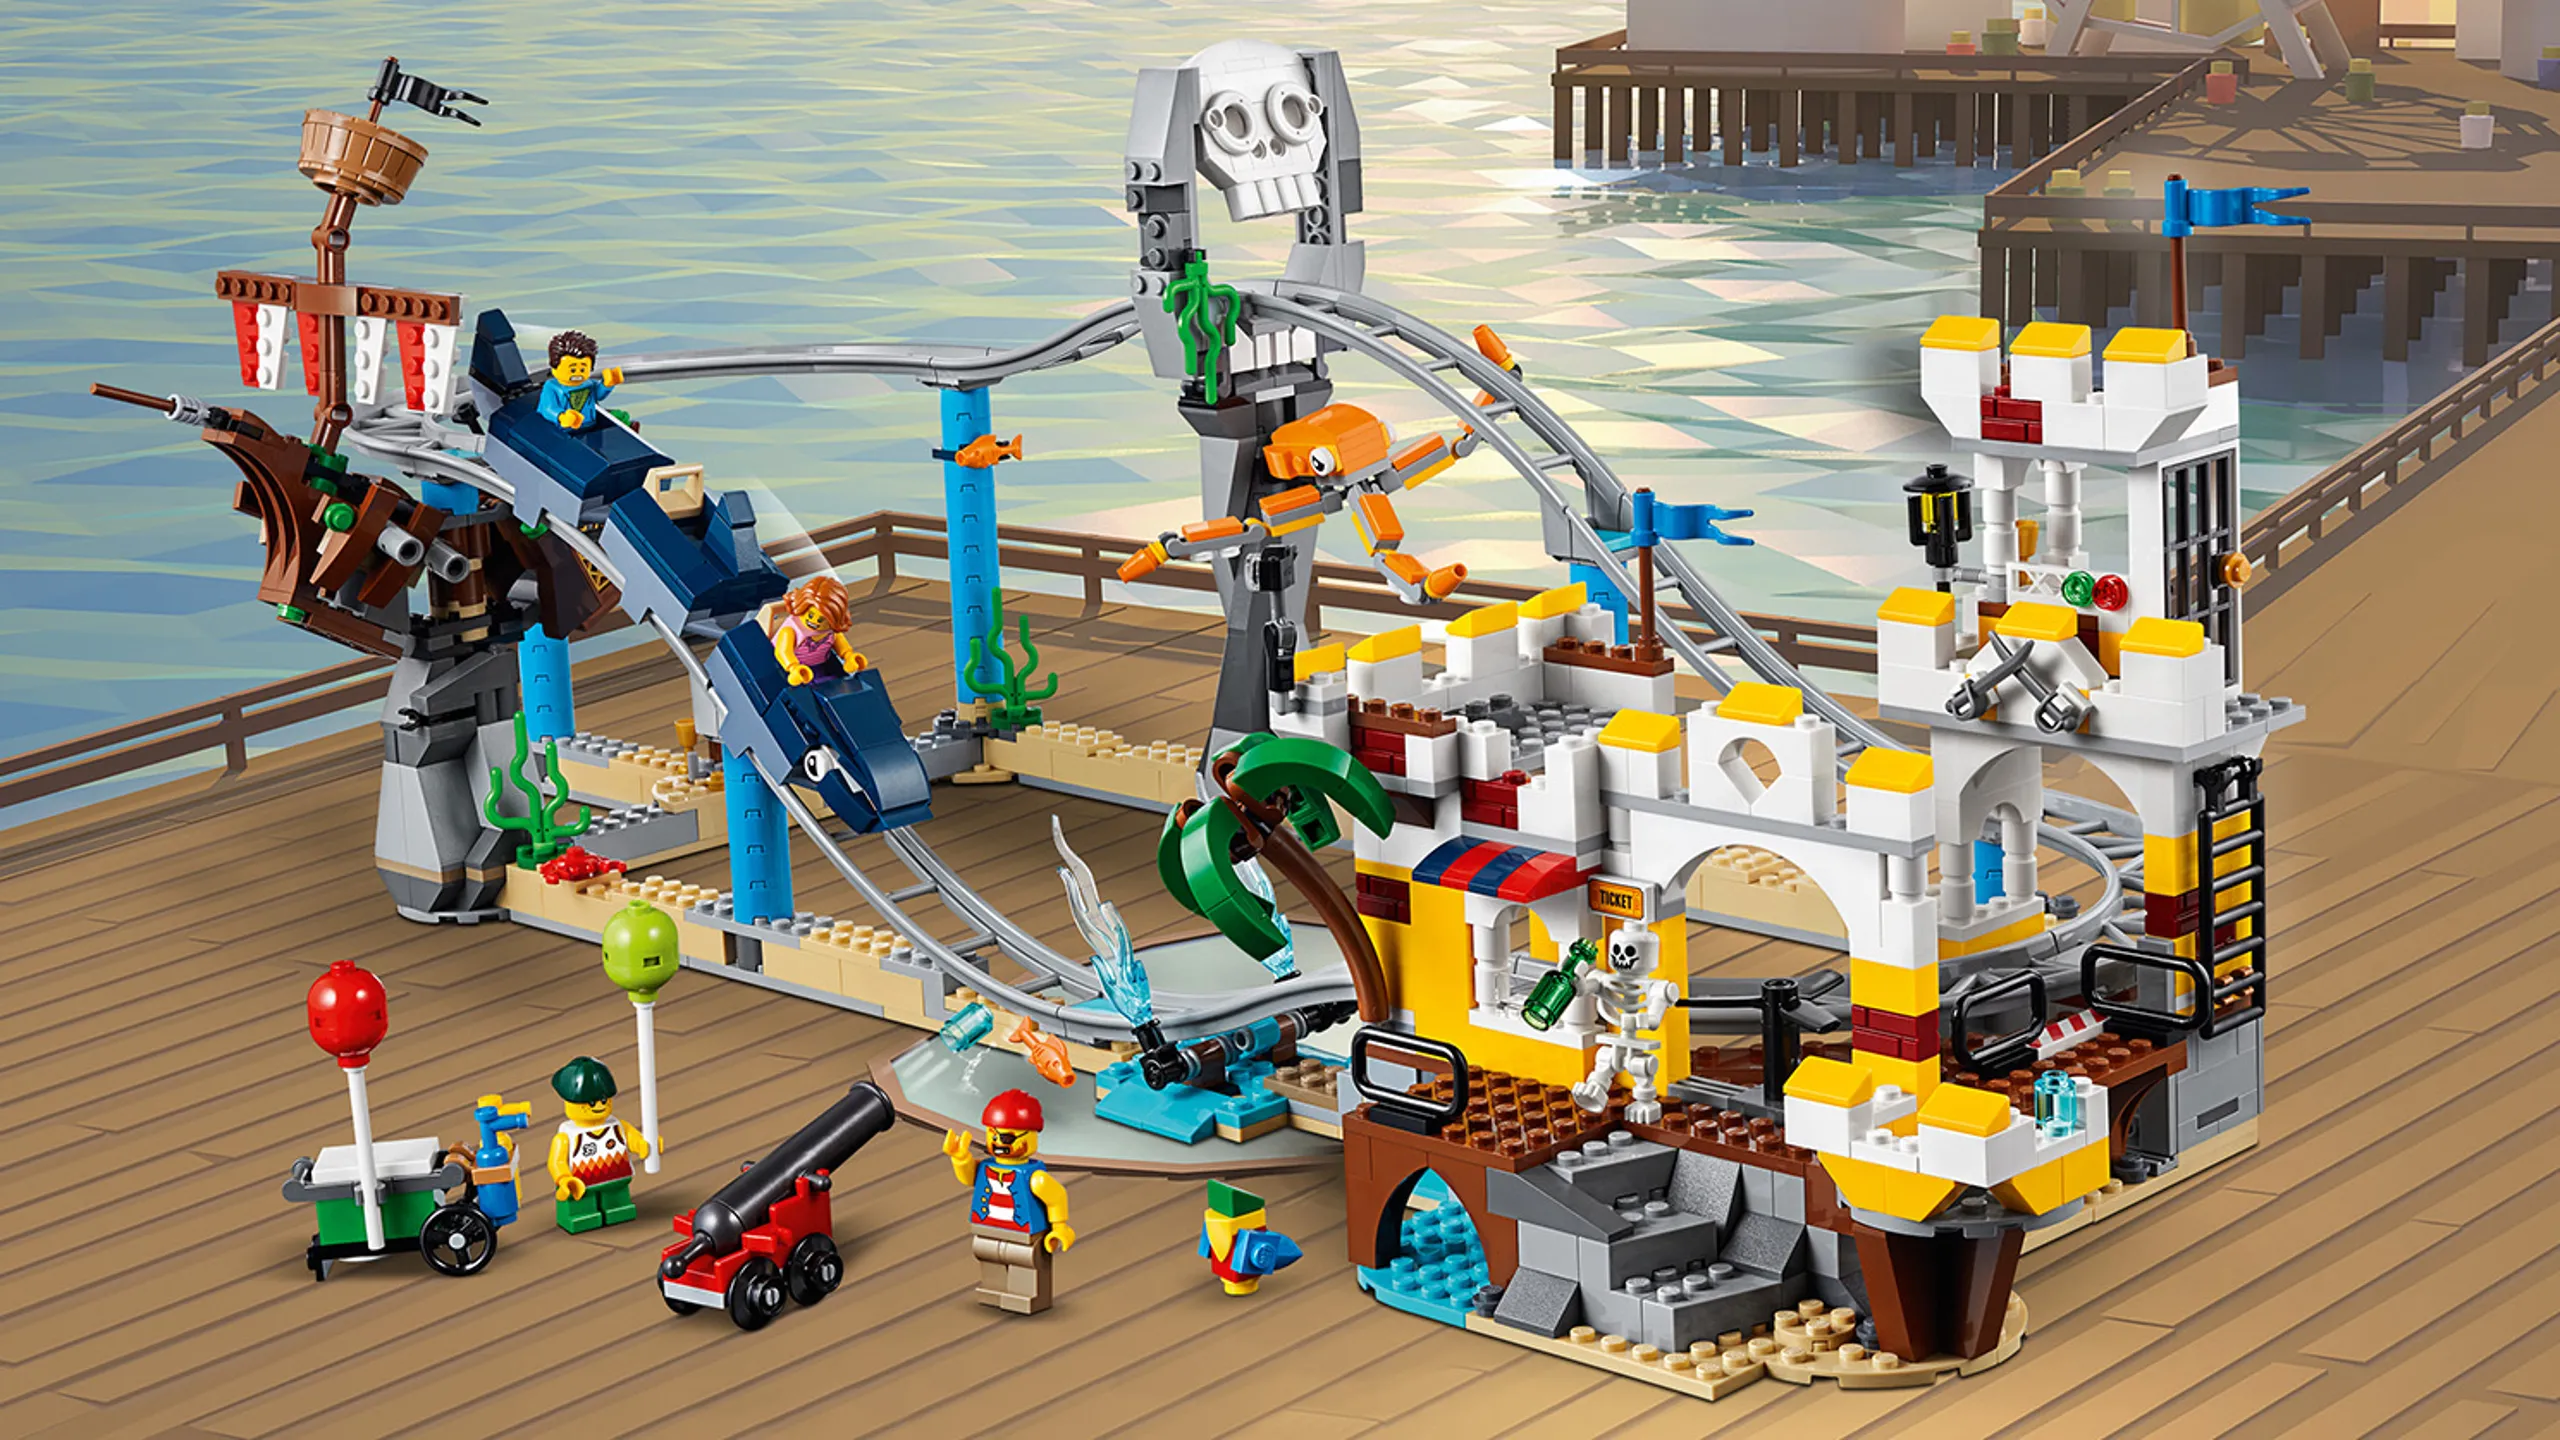 LEGO Creator 3 in 1 - 31084 Pirate Roller Coaster -  Build a pirate themed roller coaster on the pier with a balloon stand on the ground.